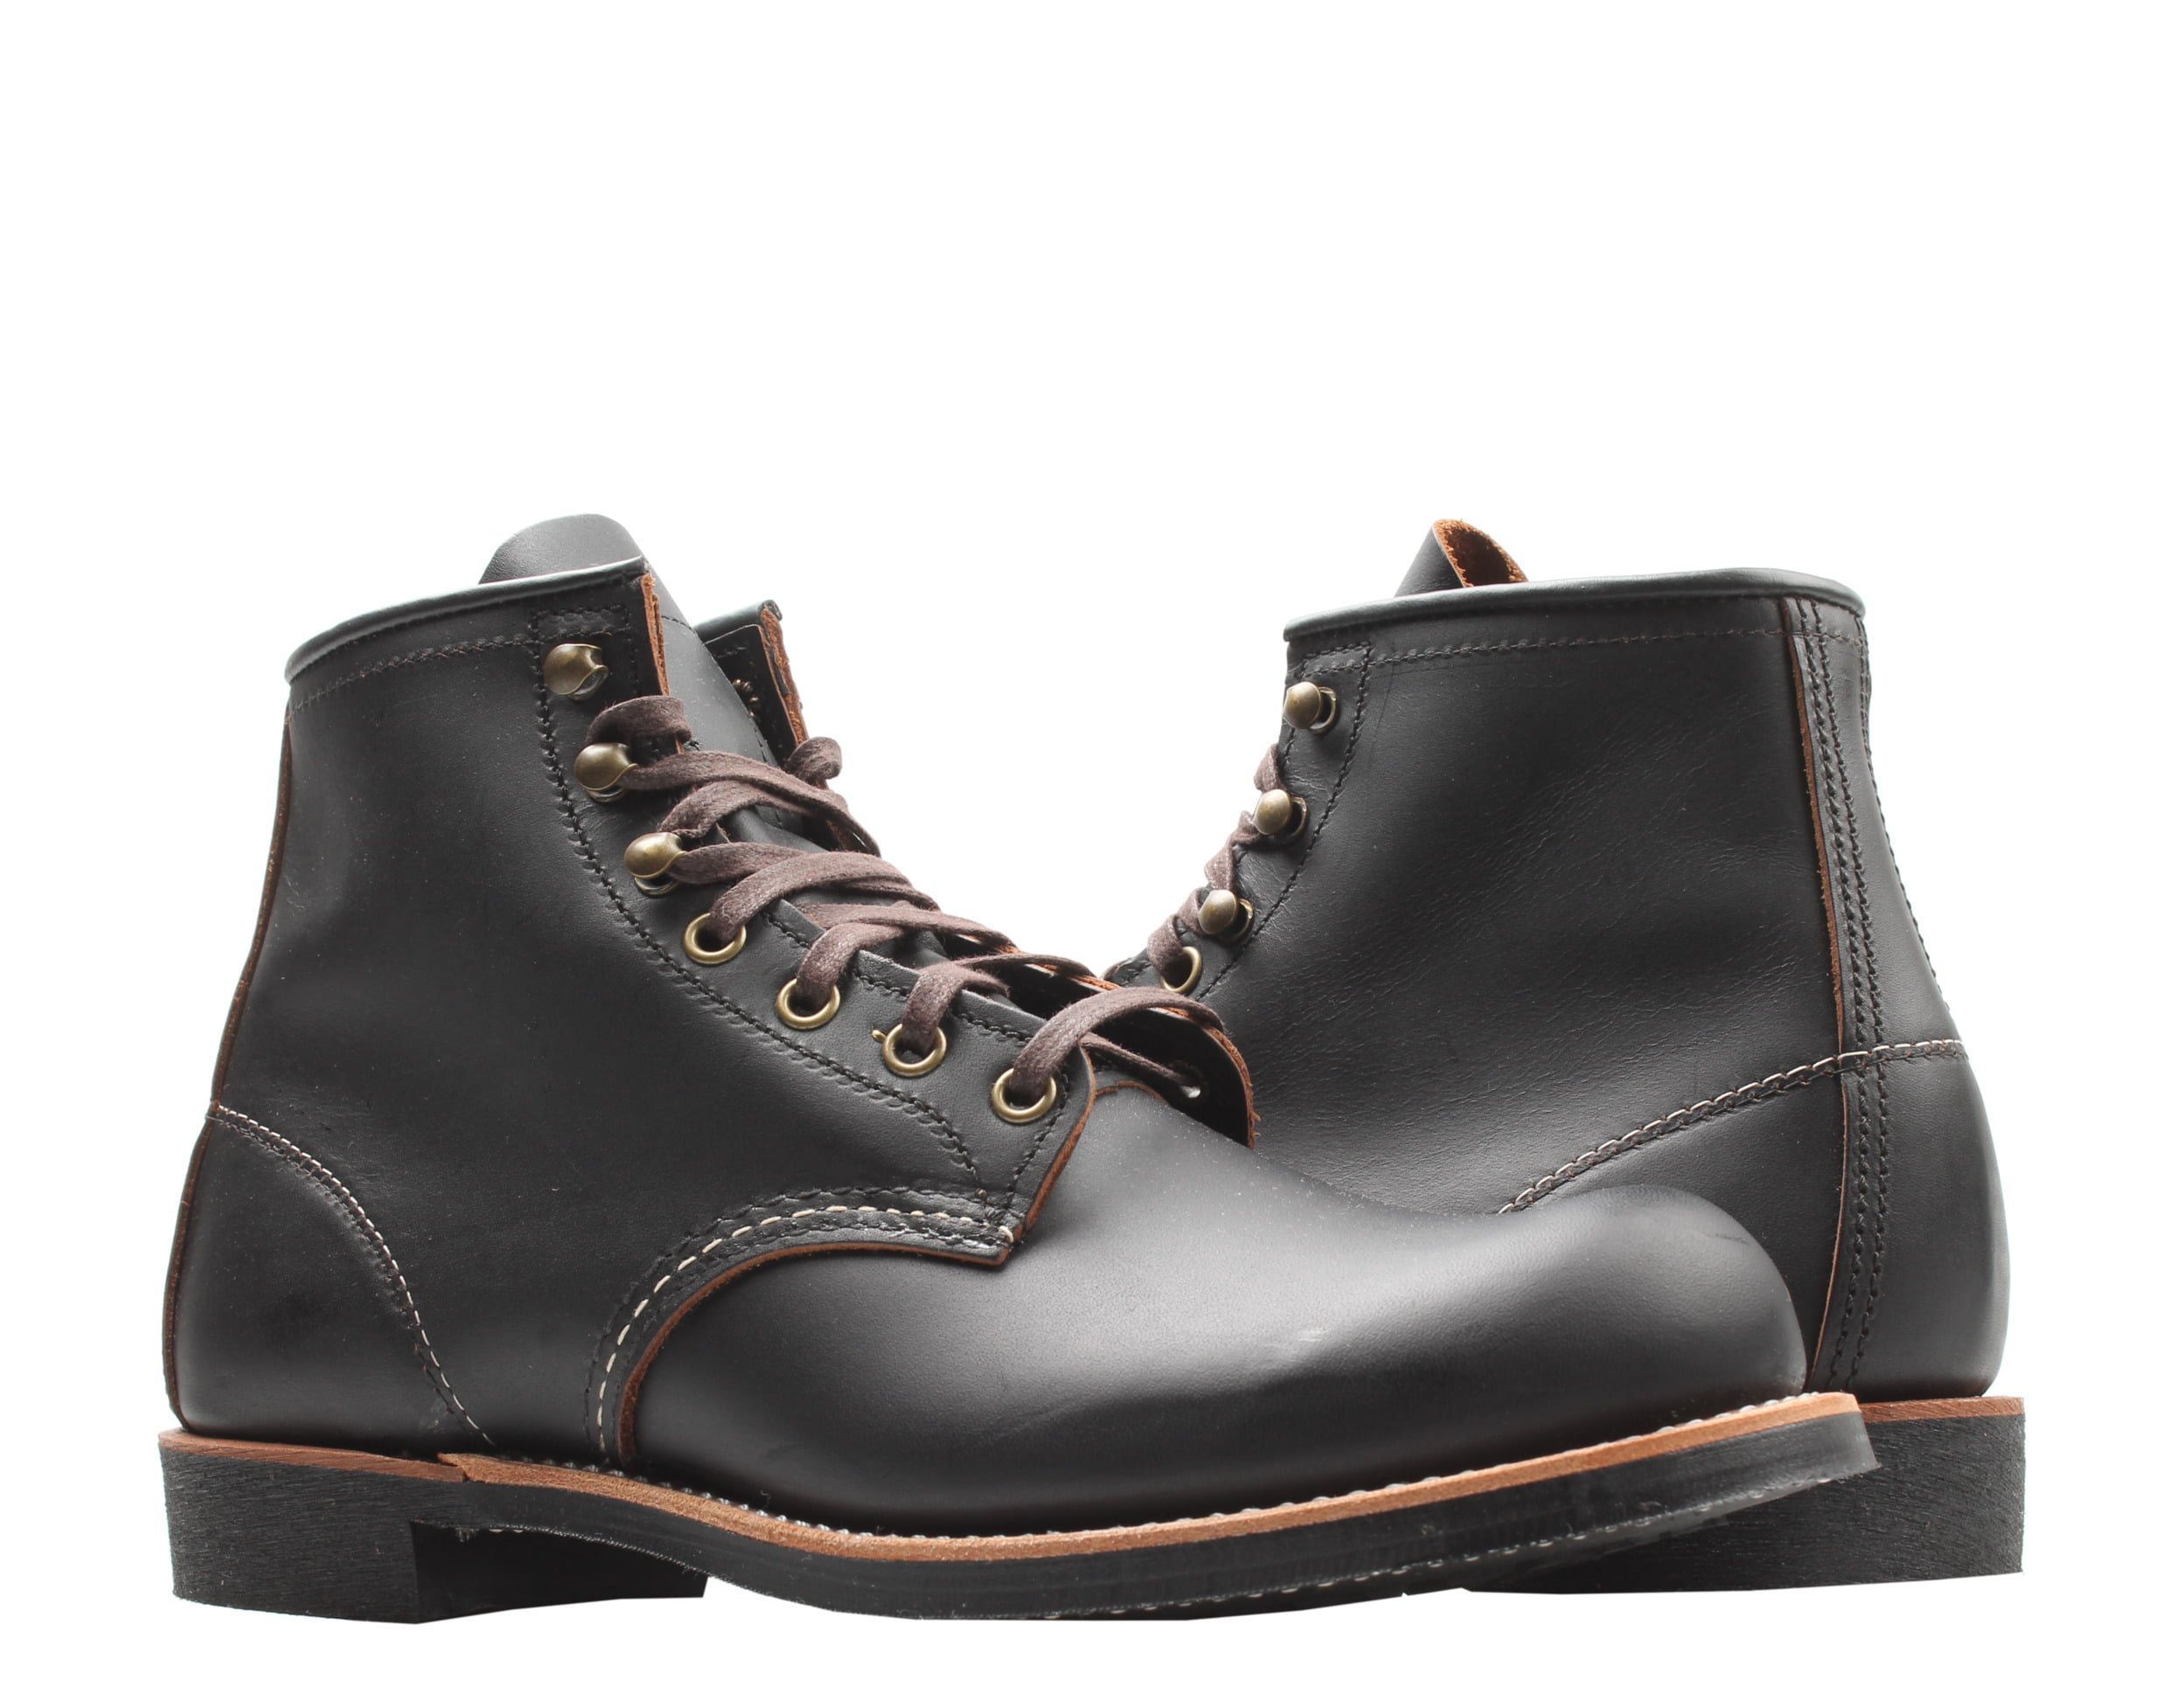 Red Wing Heritage Blacksmith 6-Inch 3345 Men's Boots Size 9D - Walmart.com